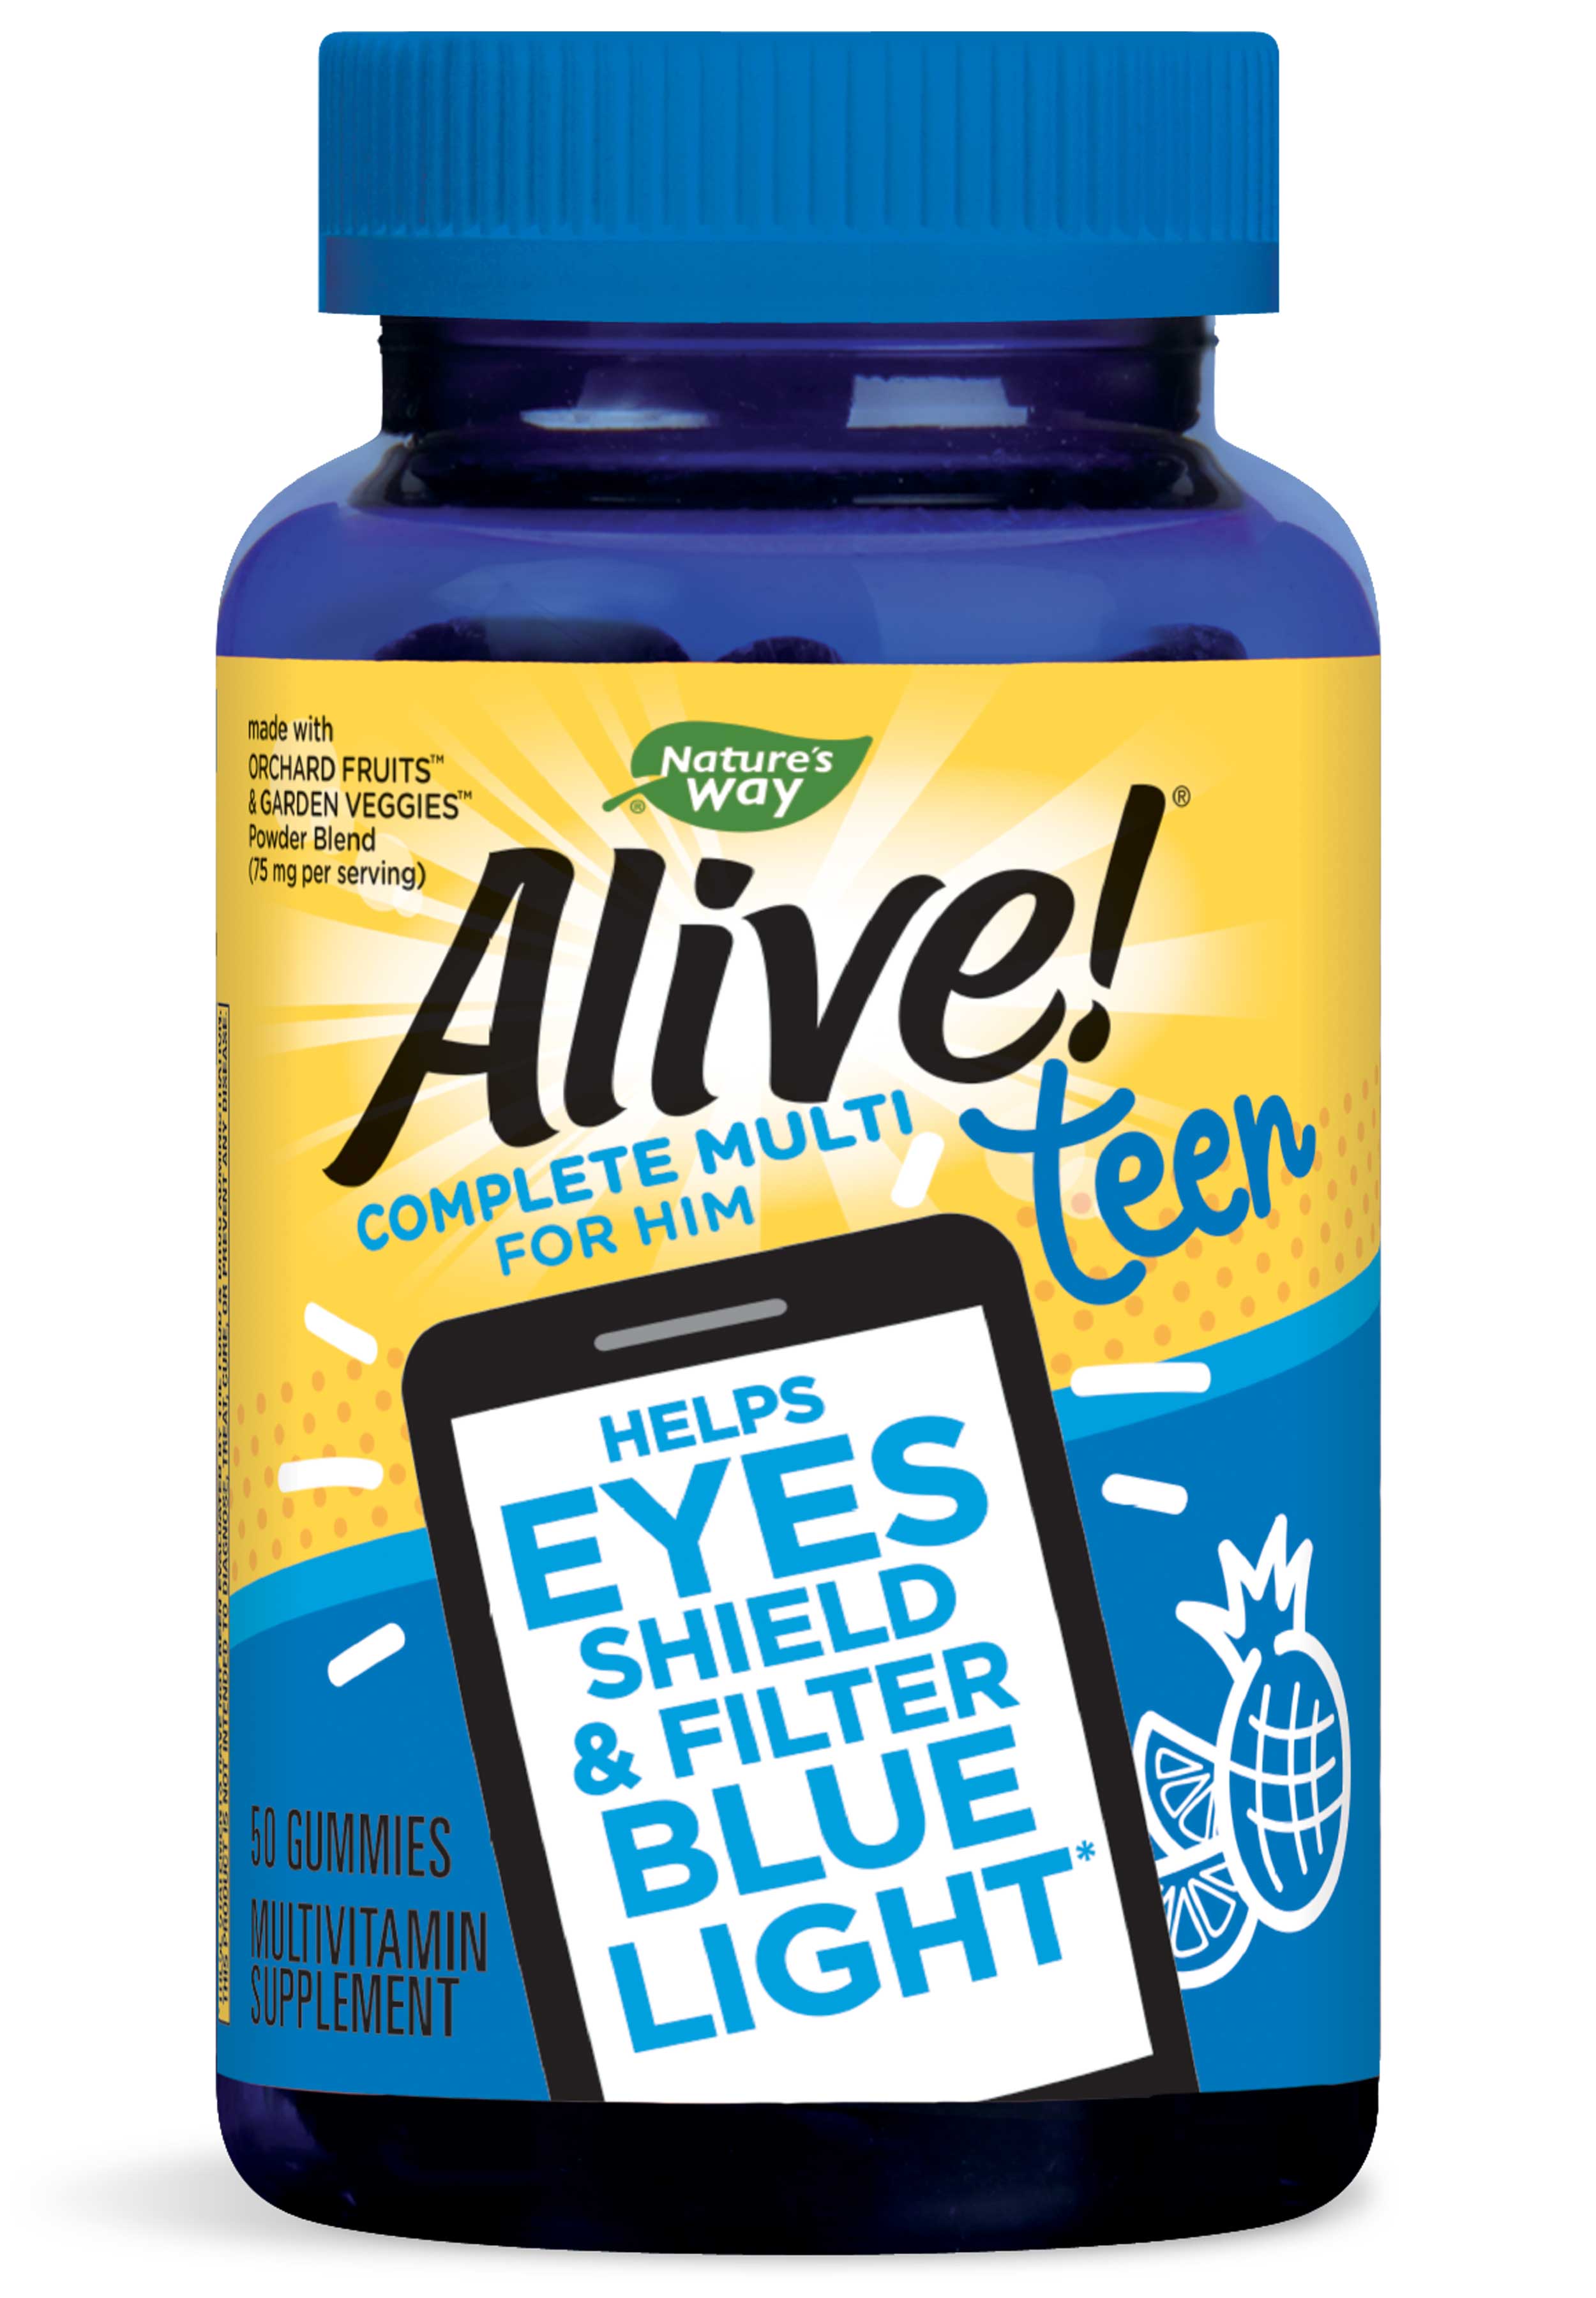 Nature's Way Alive!® Teen Gummy Multivitamin for Him